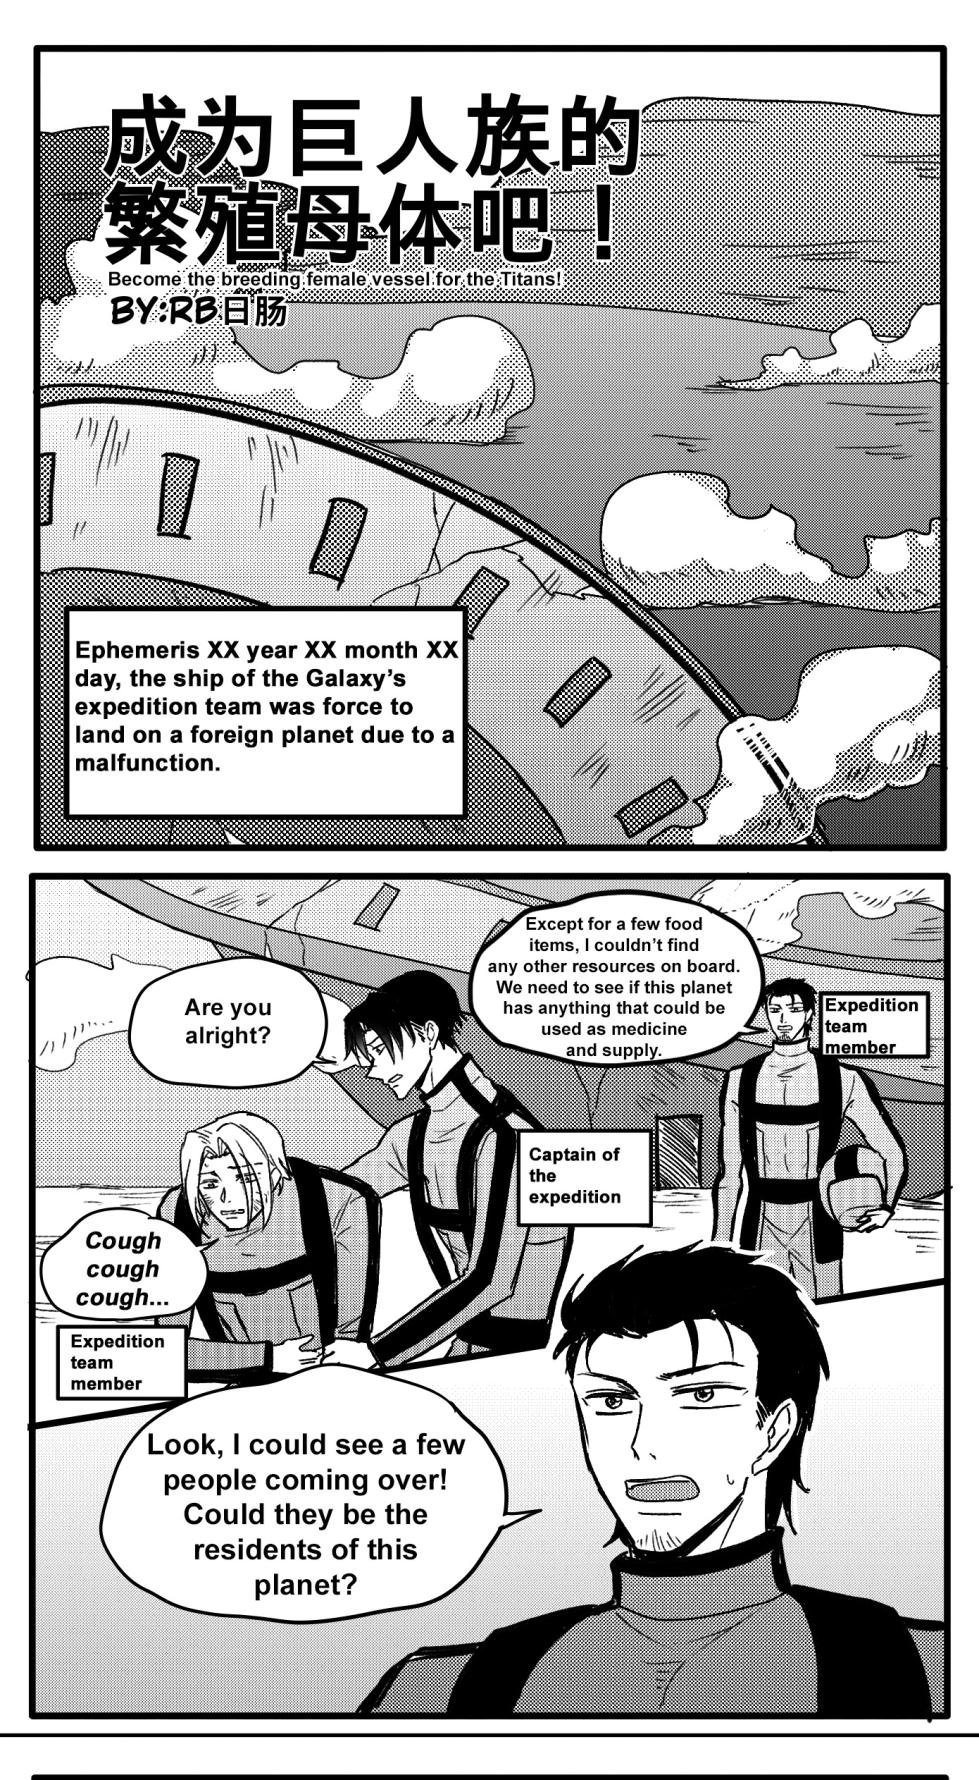 [RBrichang] Become the Breeding Vessel for the Titans - Page 1